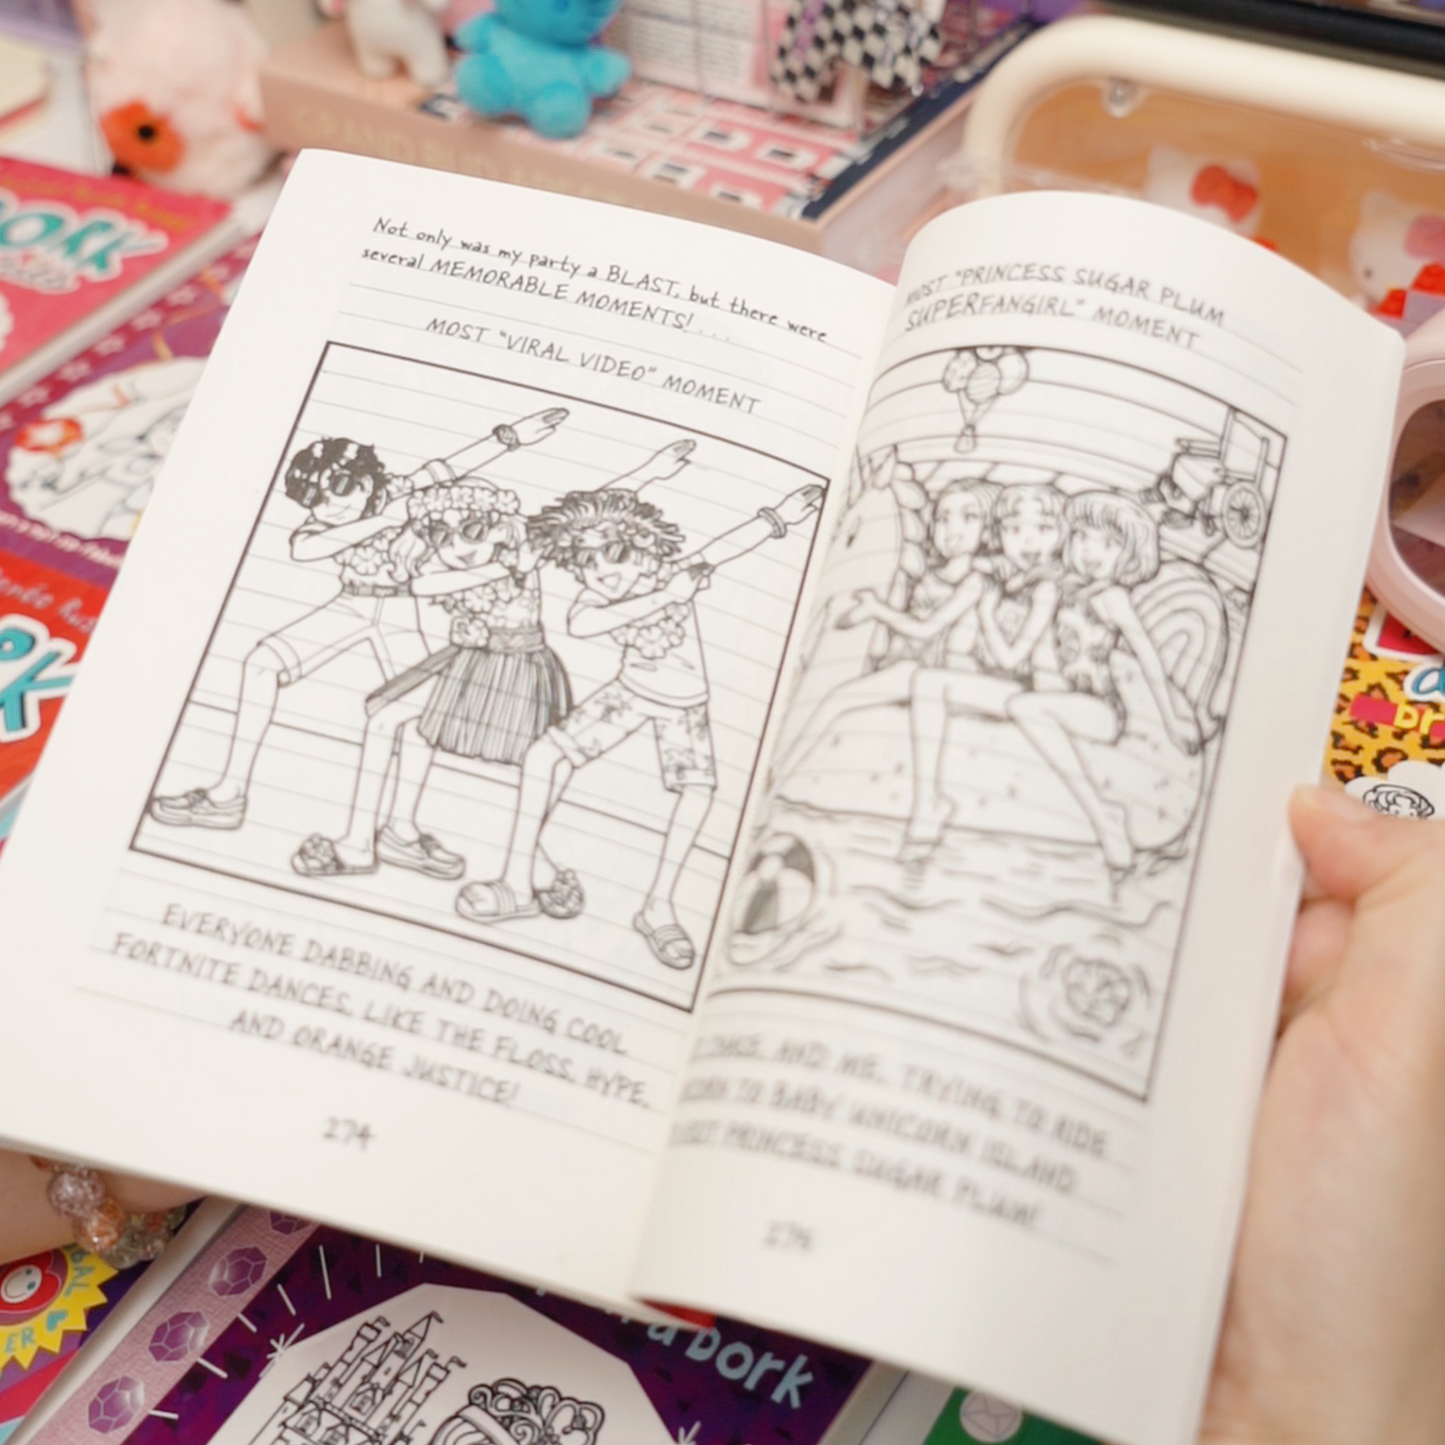 Glamore Selection Tales from a Not-So-Happy Birthday by Rachel Ren Russell Dork Diaries 13